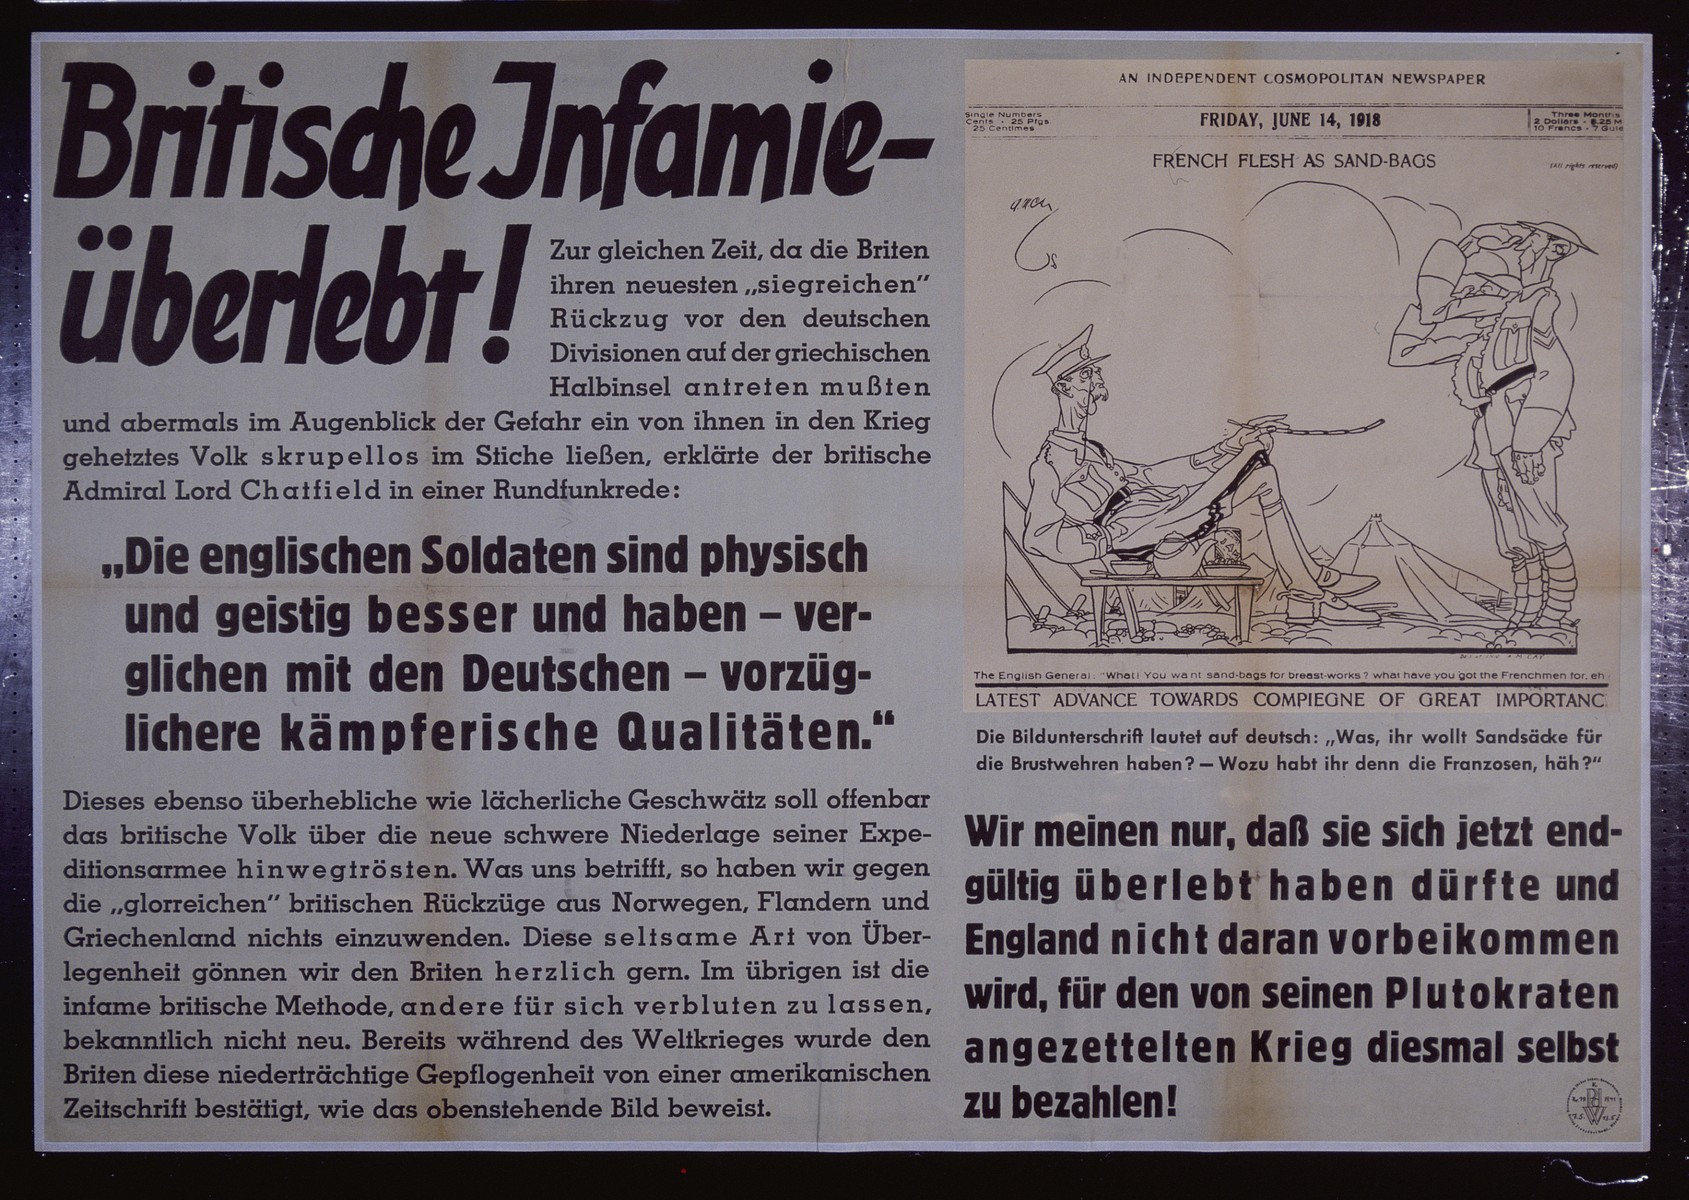 Nazi propaganda poster entitled, "Britische infamie - uberlebt," issued by the "Parole der Woche," a wall newspaper (Wandzeitung) published by the National Socialist Party propaganda office in Munich.